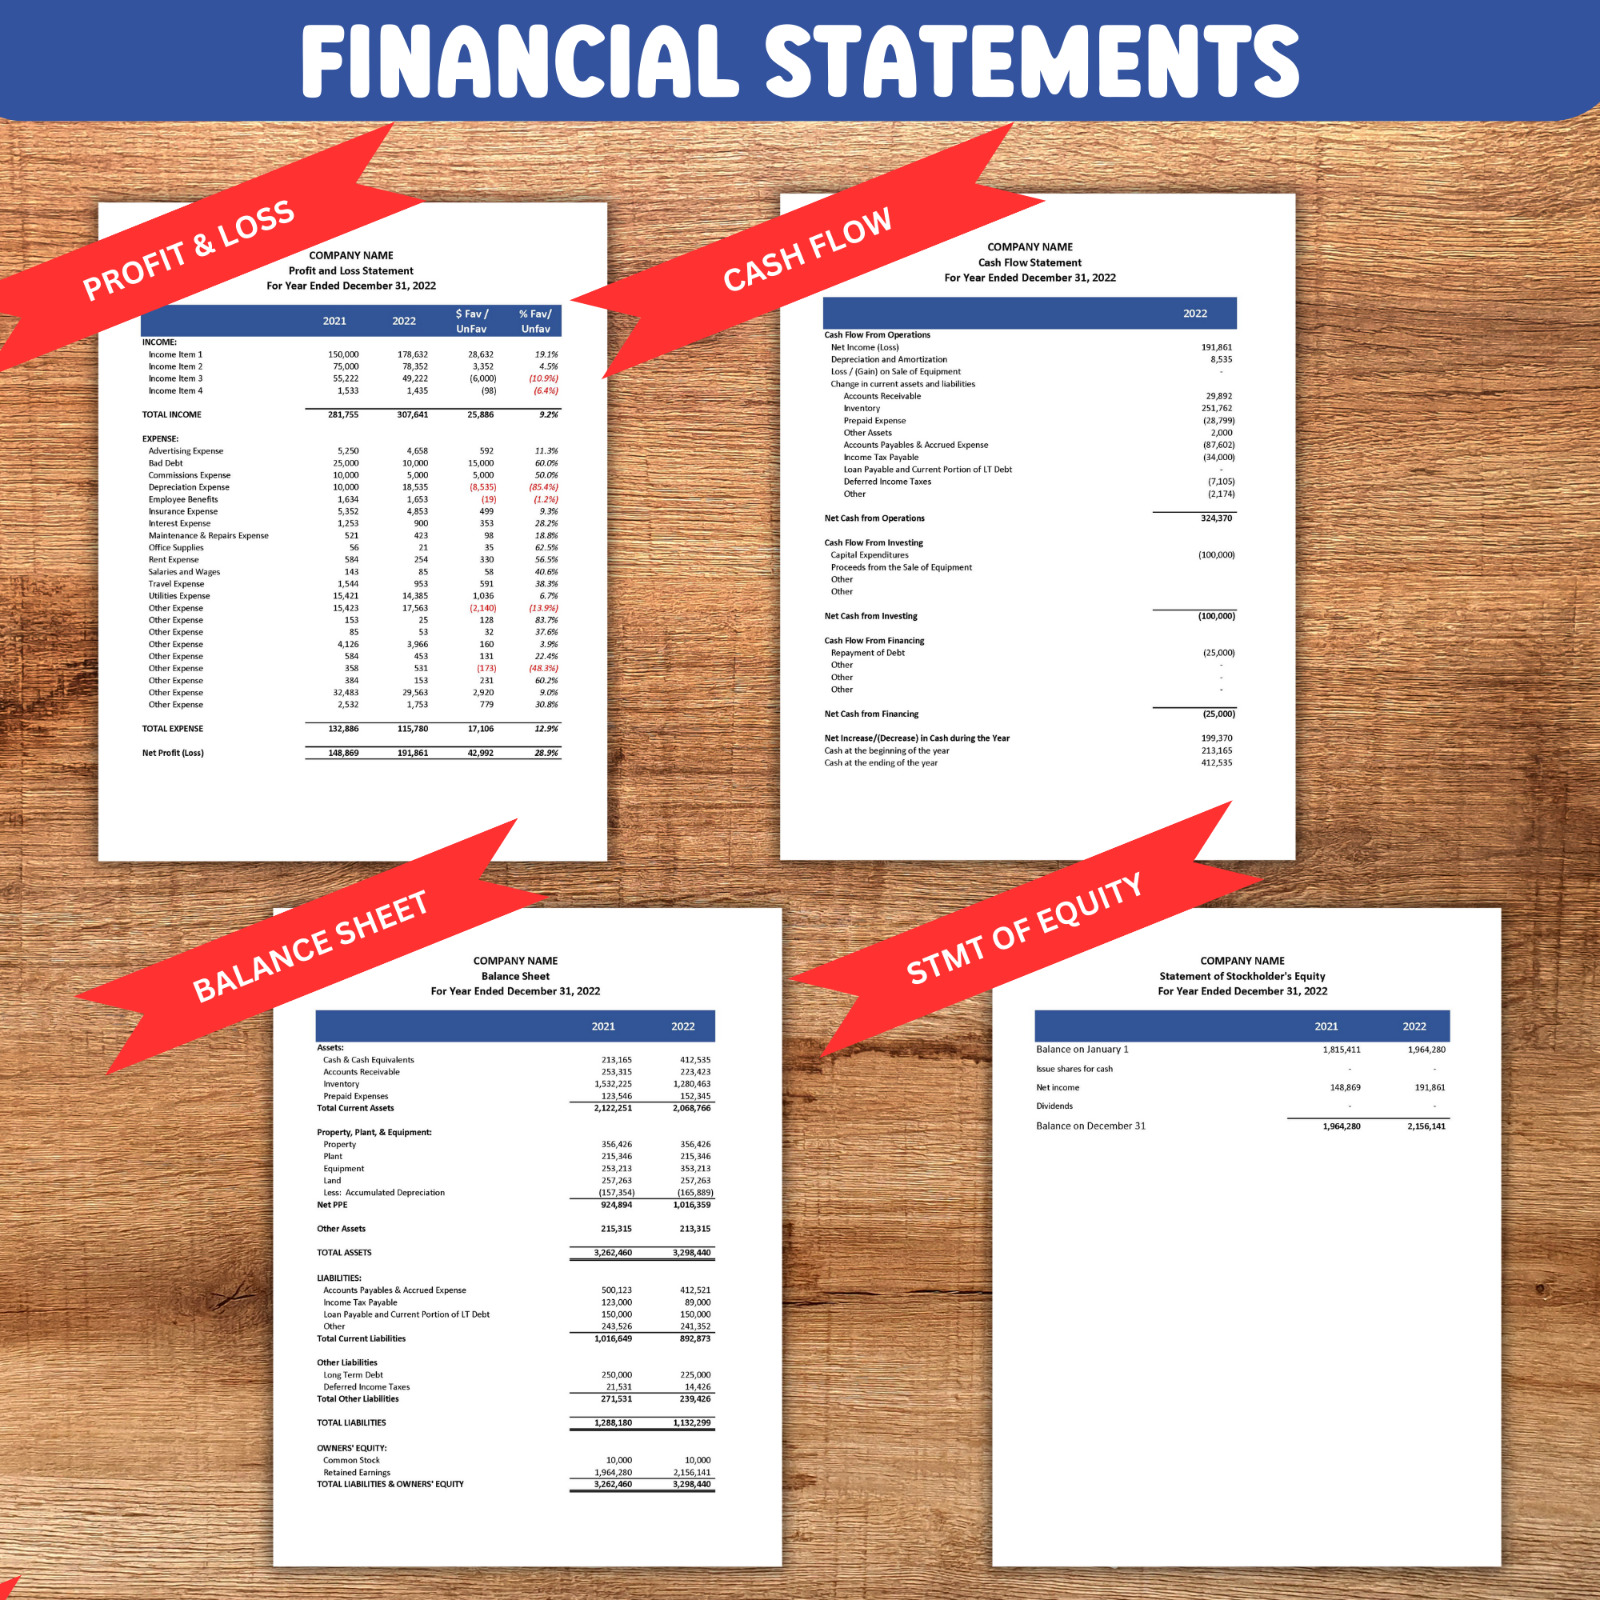 Financial Statement Template | Financial Statements | Profit and Loss Statement